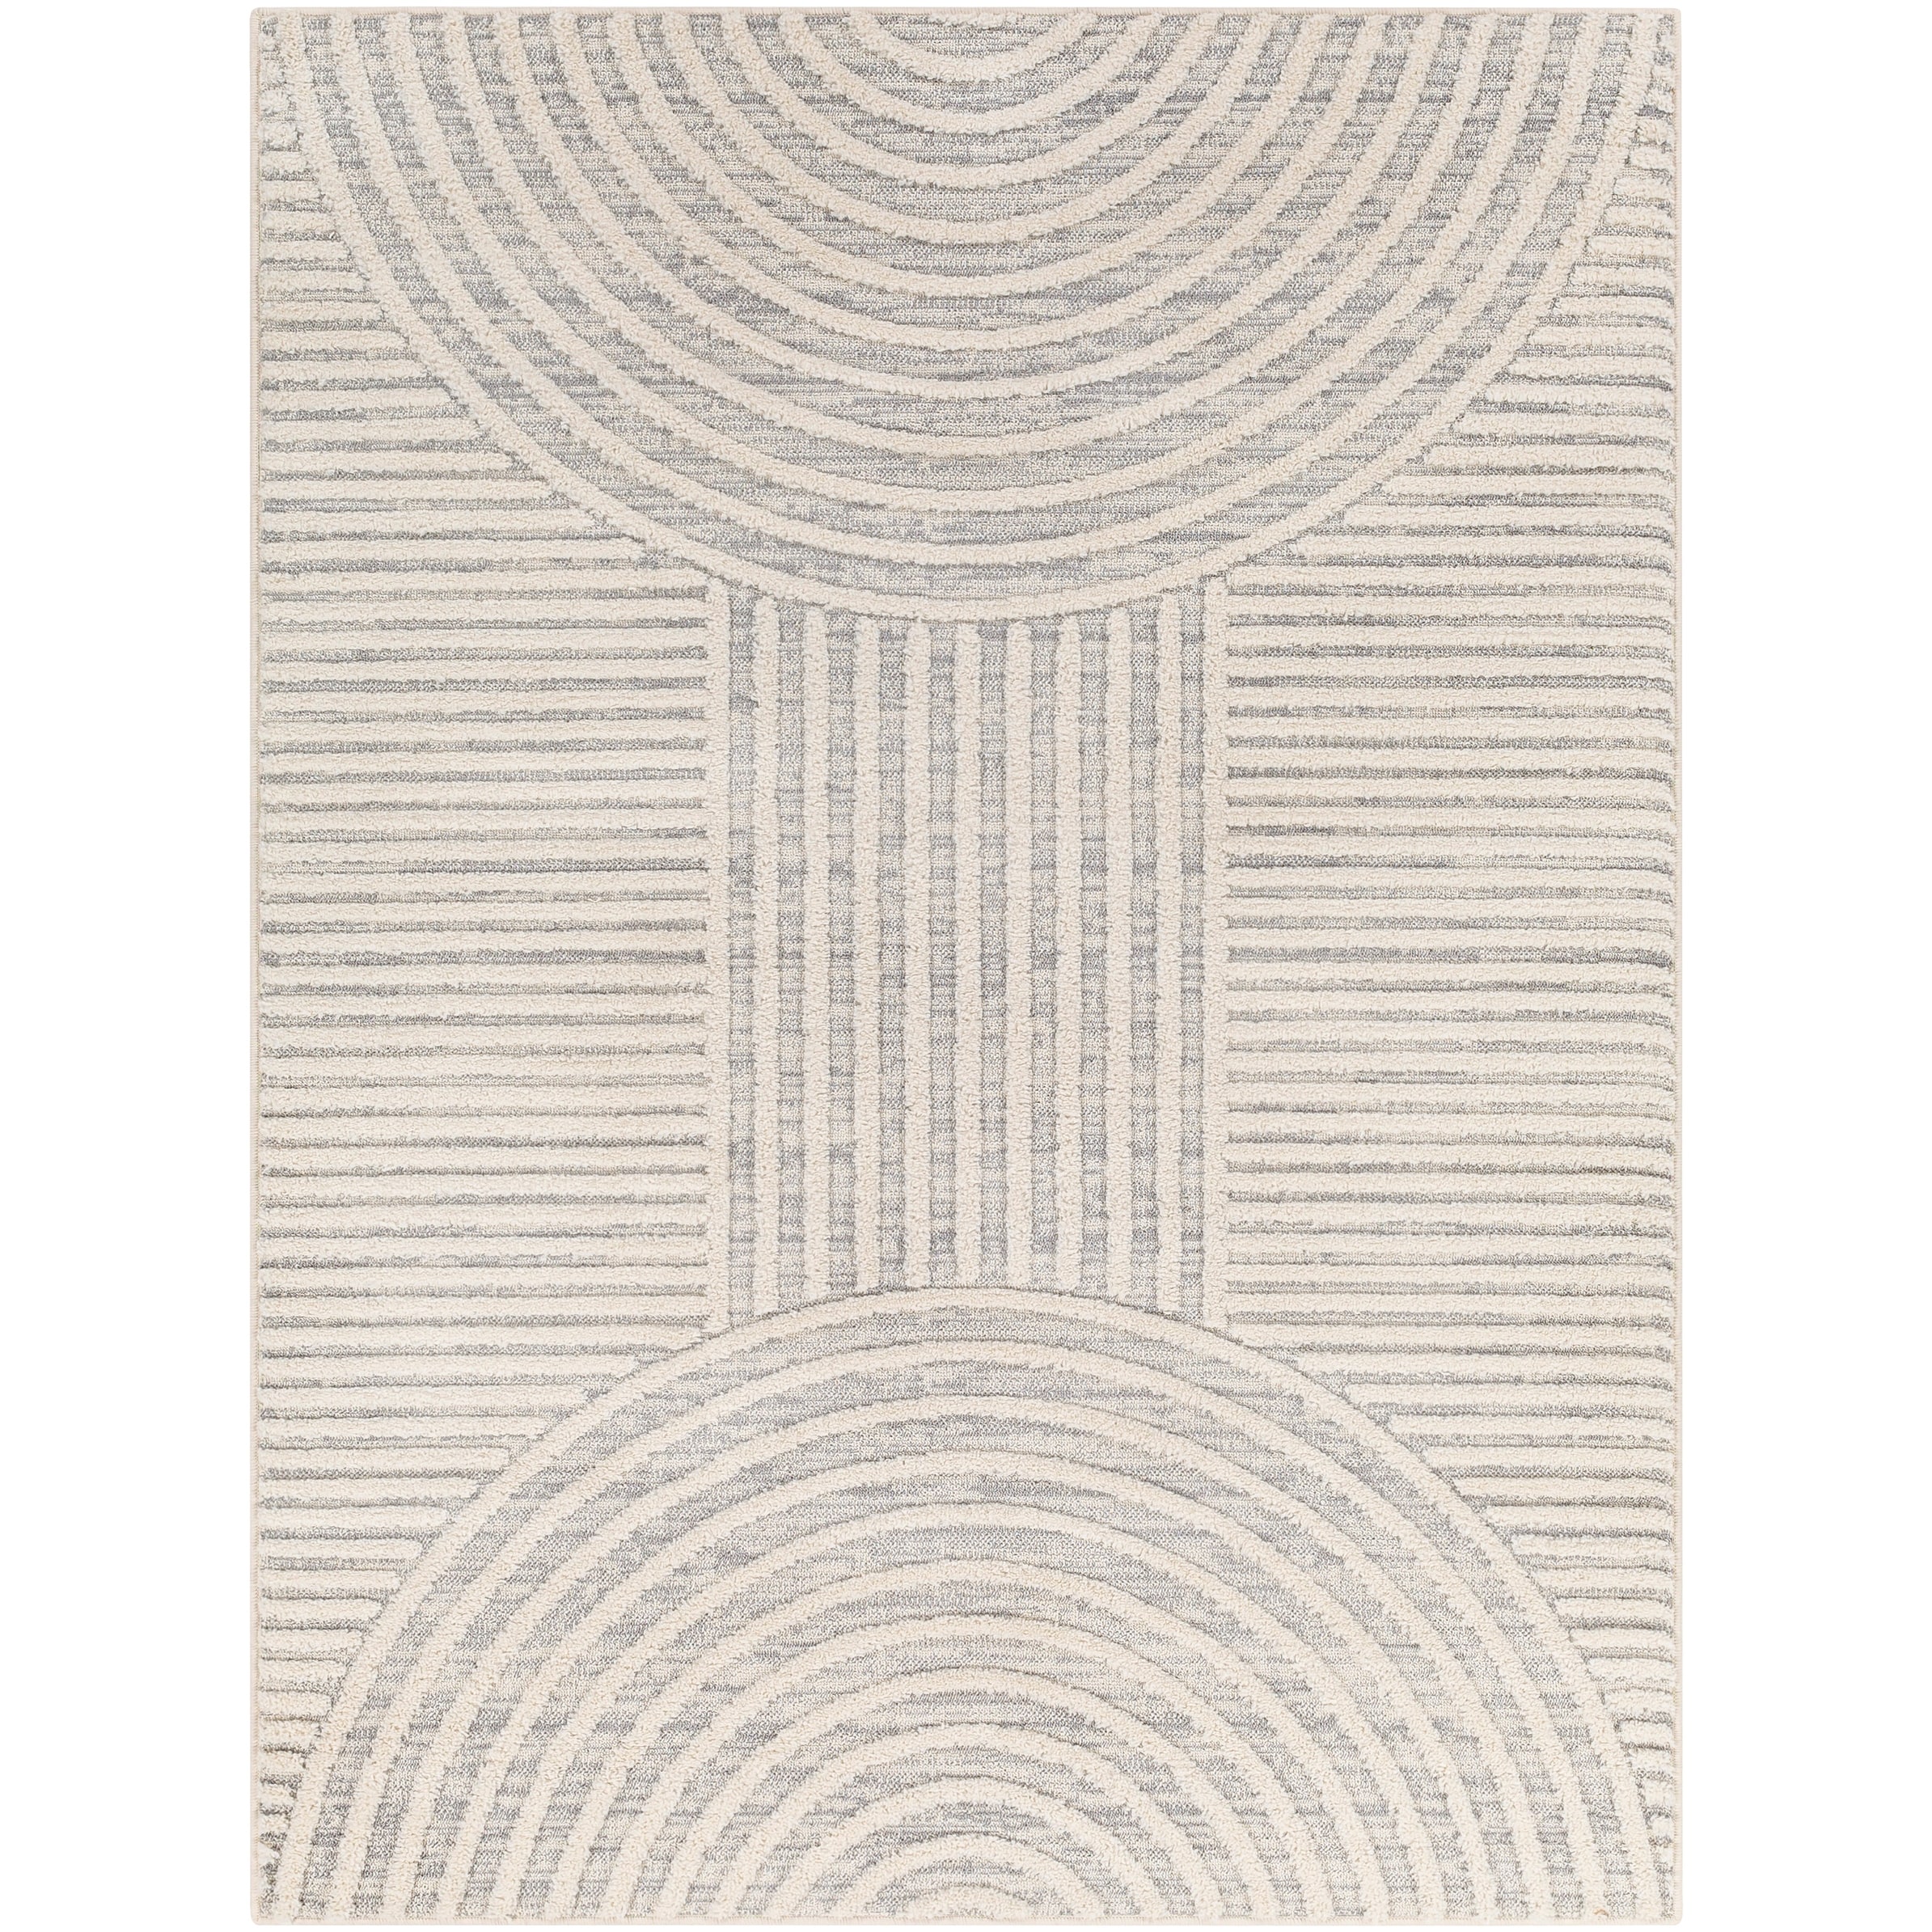 Geometric Pattern Handwoven Wool Area Rug (2.5x4.5), 'Between the Mountains